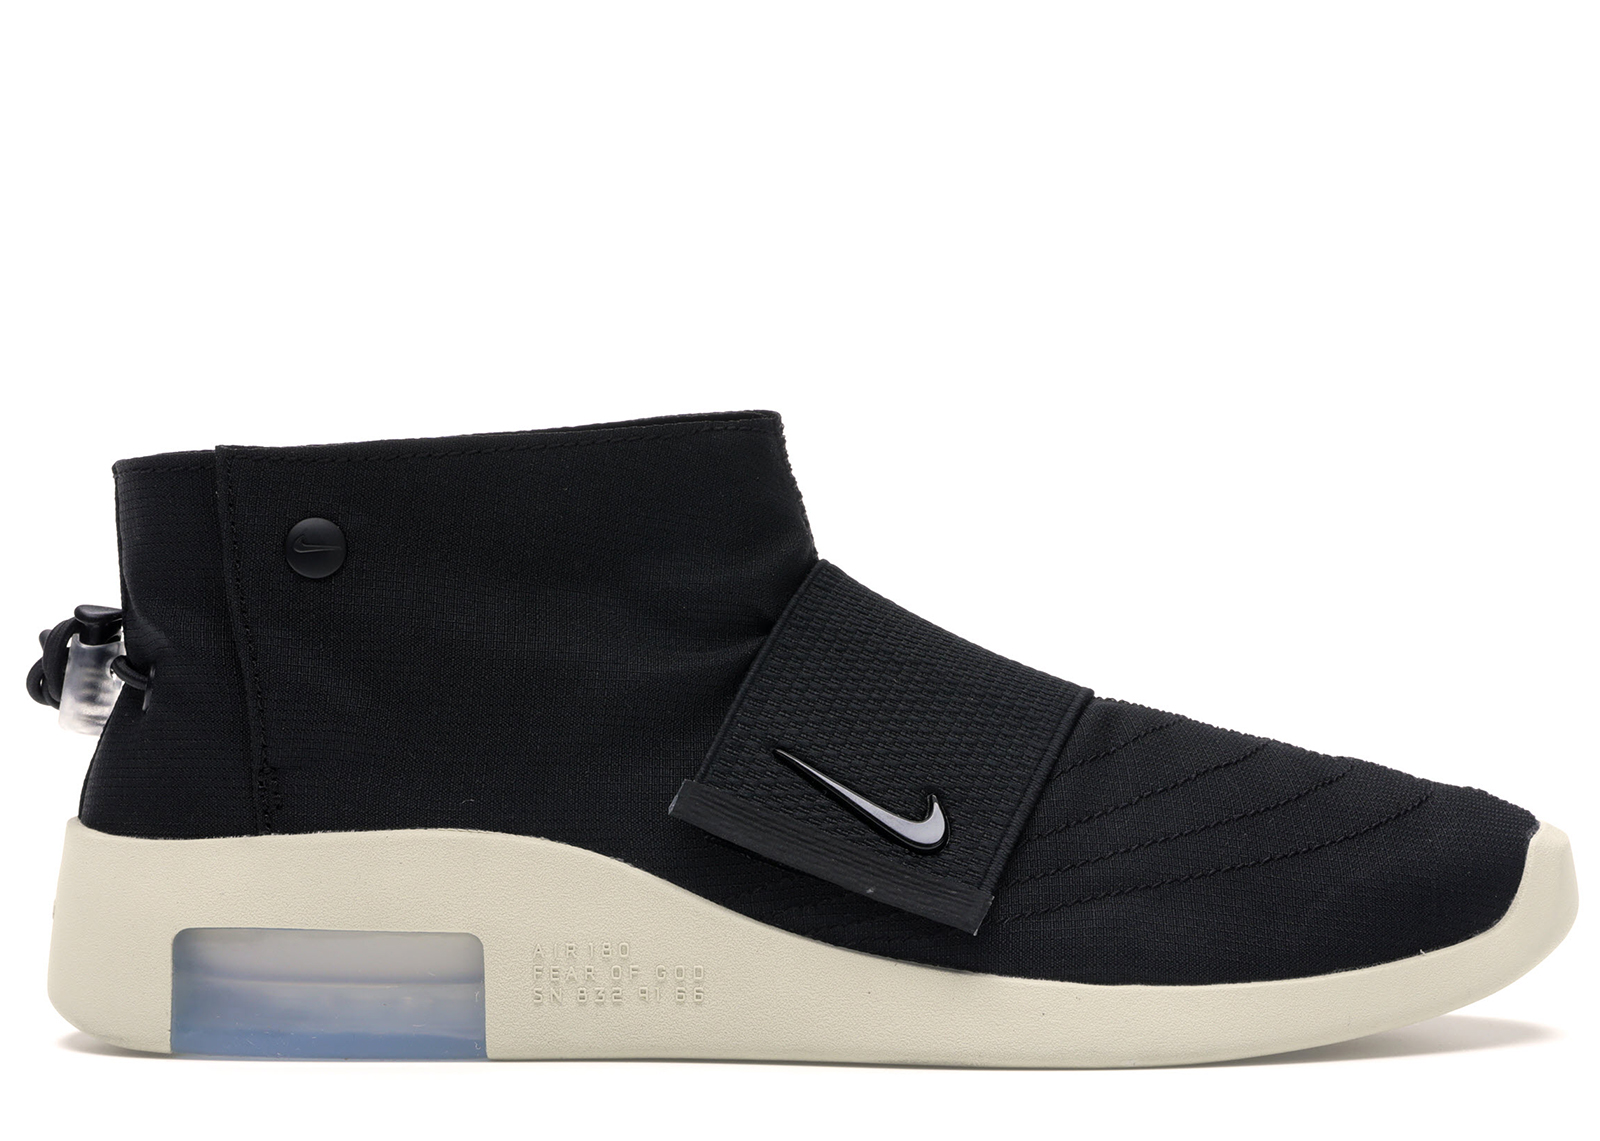 Nike Air Fear Of God Moccasin Black - AT8086-002 - US